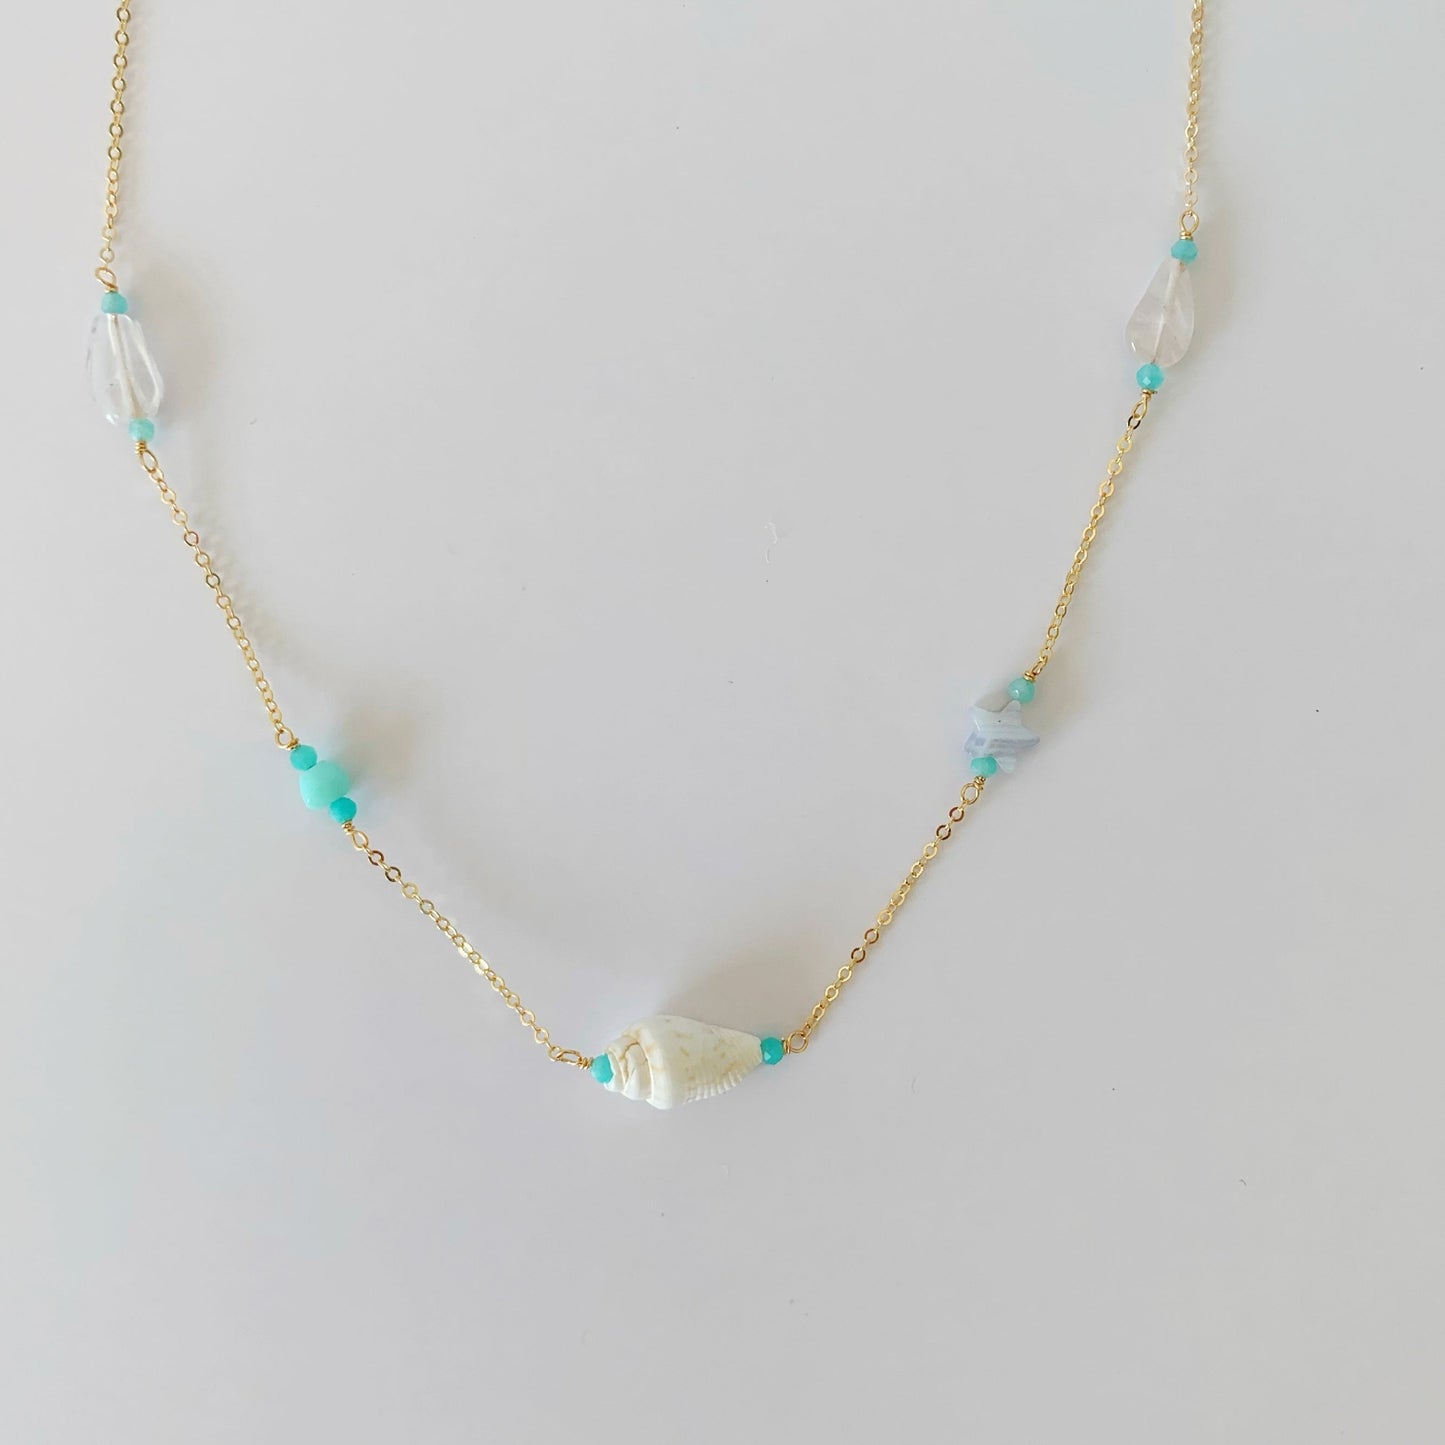 The island hopper necklace by mermaids and madeleines is a station style necklace with semiprecious beads and a shell at the center on 14k gold filled chain. this necklace is photographed on a white surface